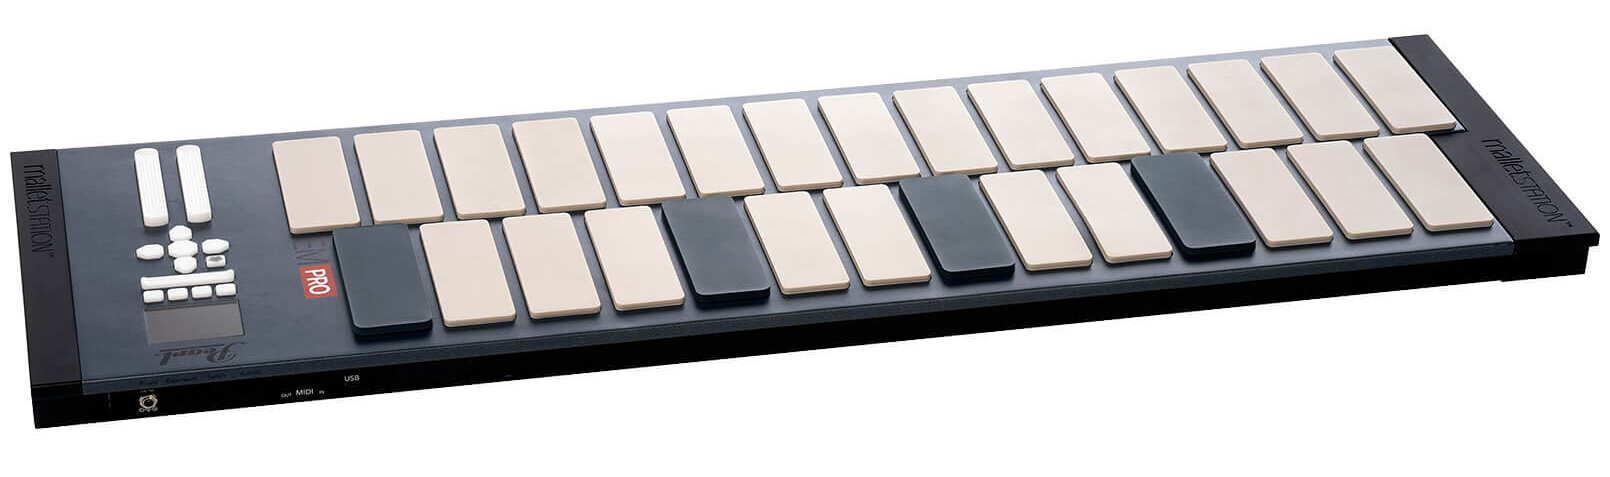 RSP helped a client create an electronic Marimba keyboard.